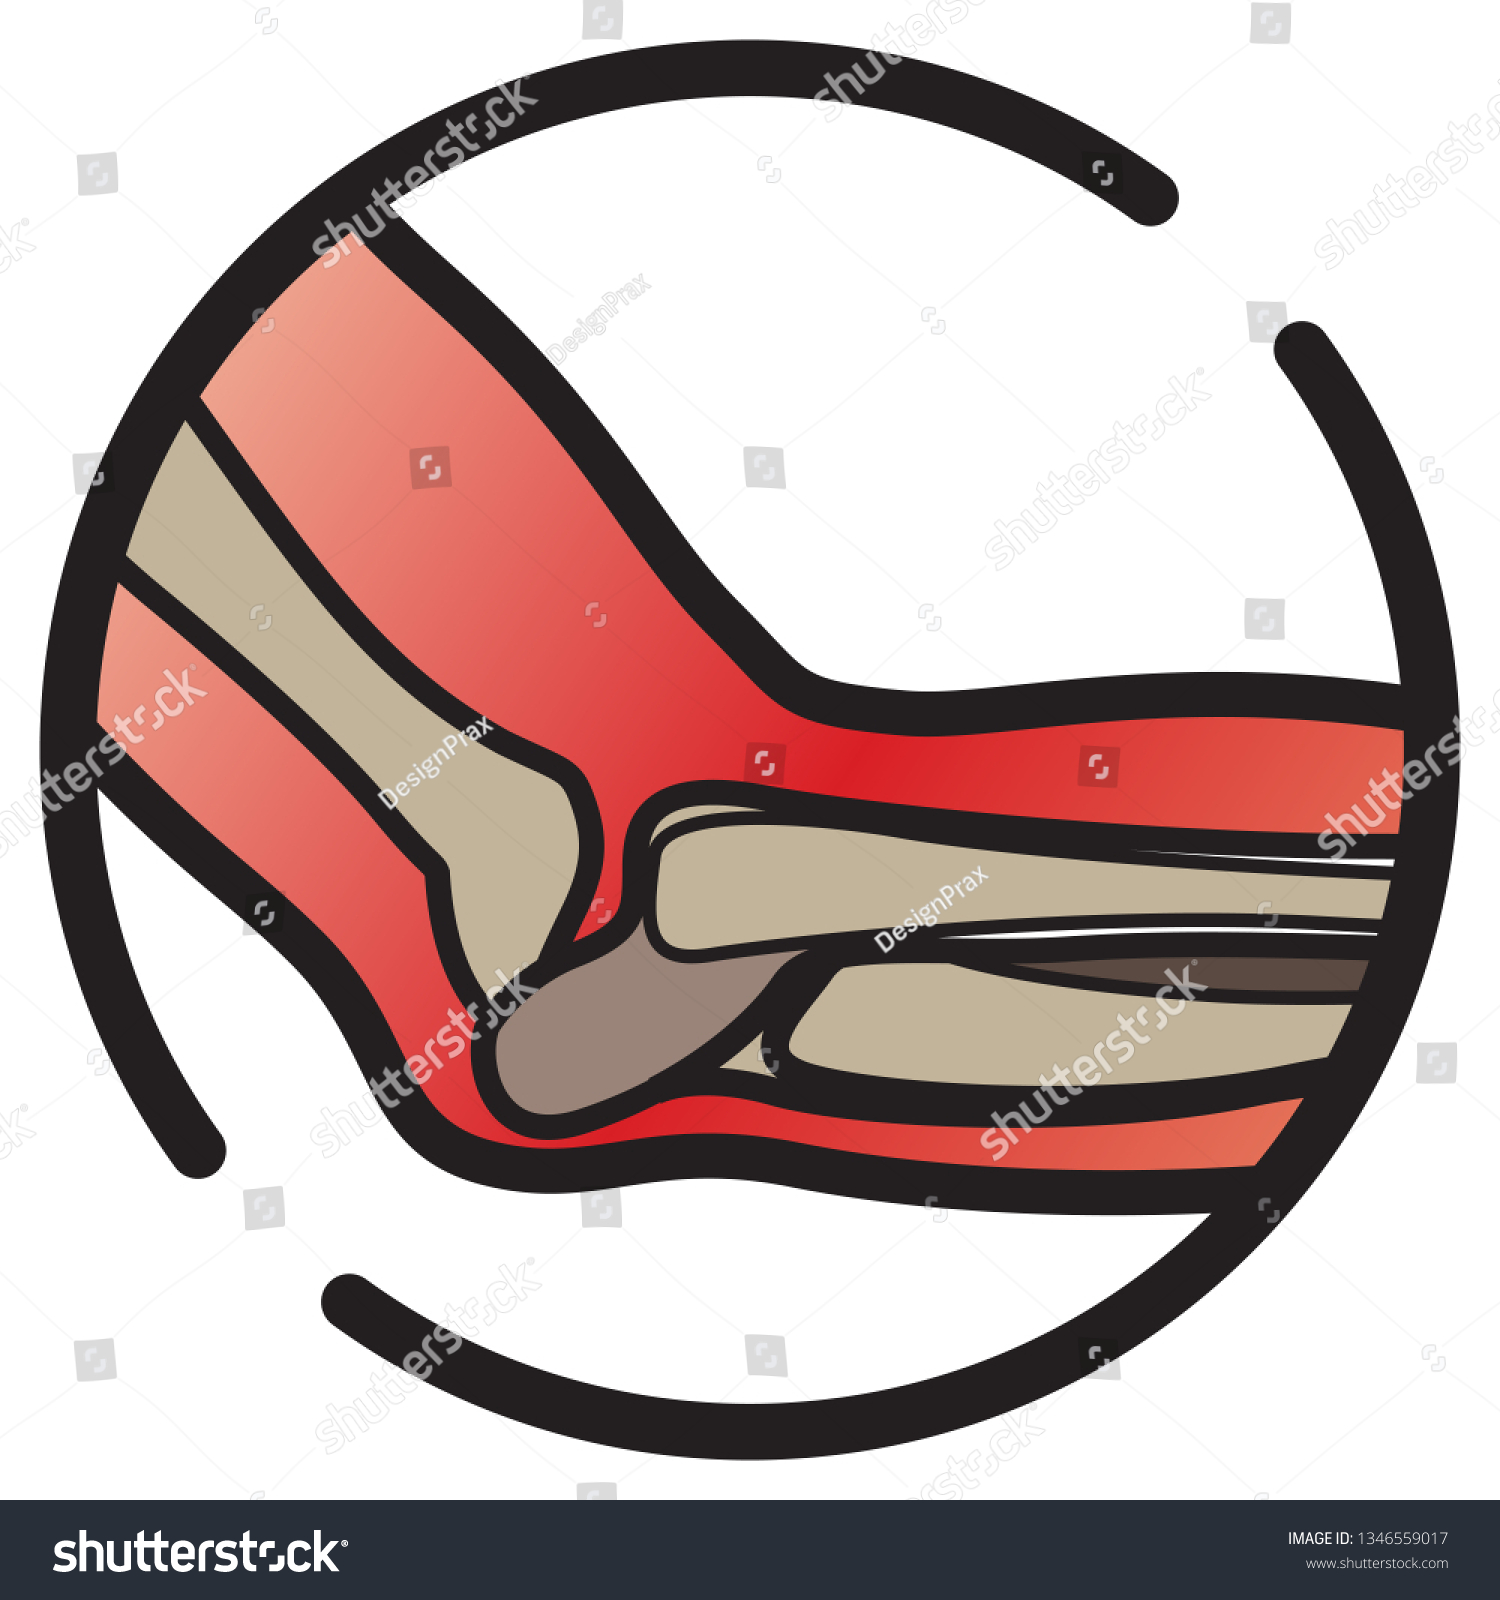 Elbow Bone Icon Eps 10 File Stock Vector Royalty Free 1346559017 Shutterstock